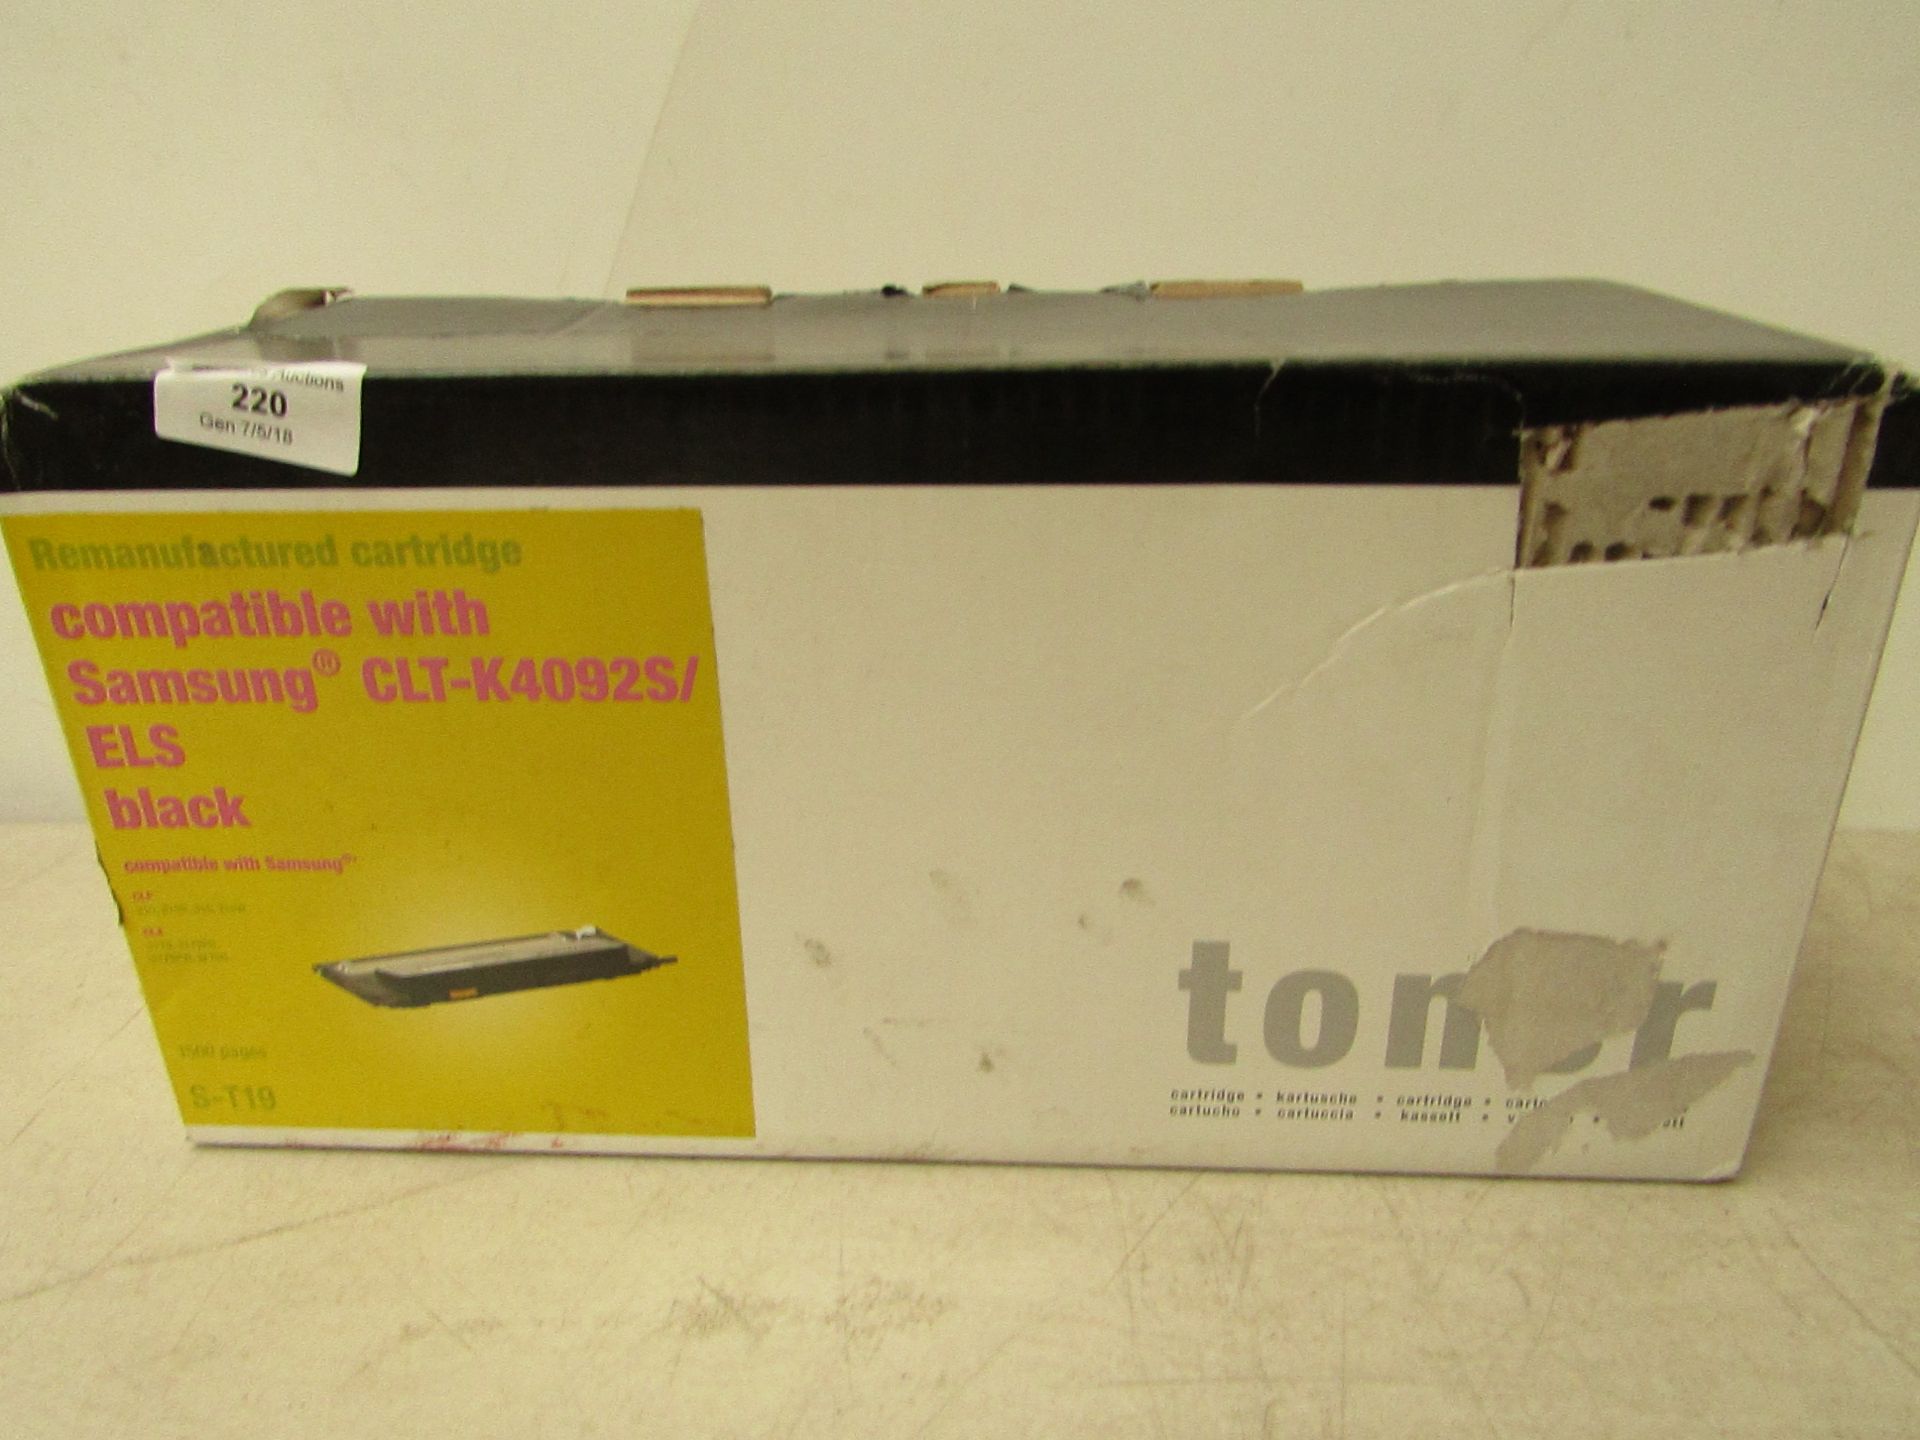 2x Toner cartridge, black coloured, unchecked and boxed.